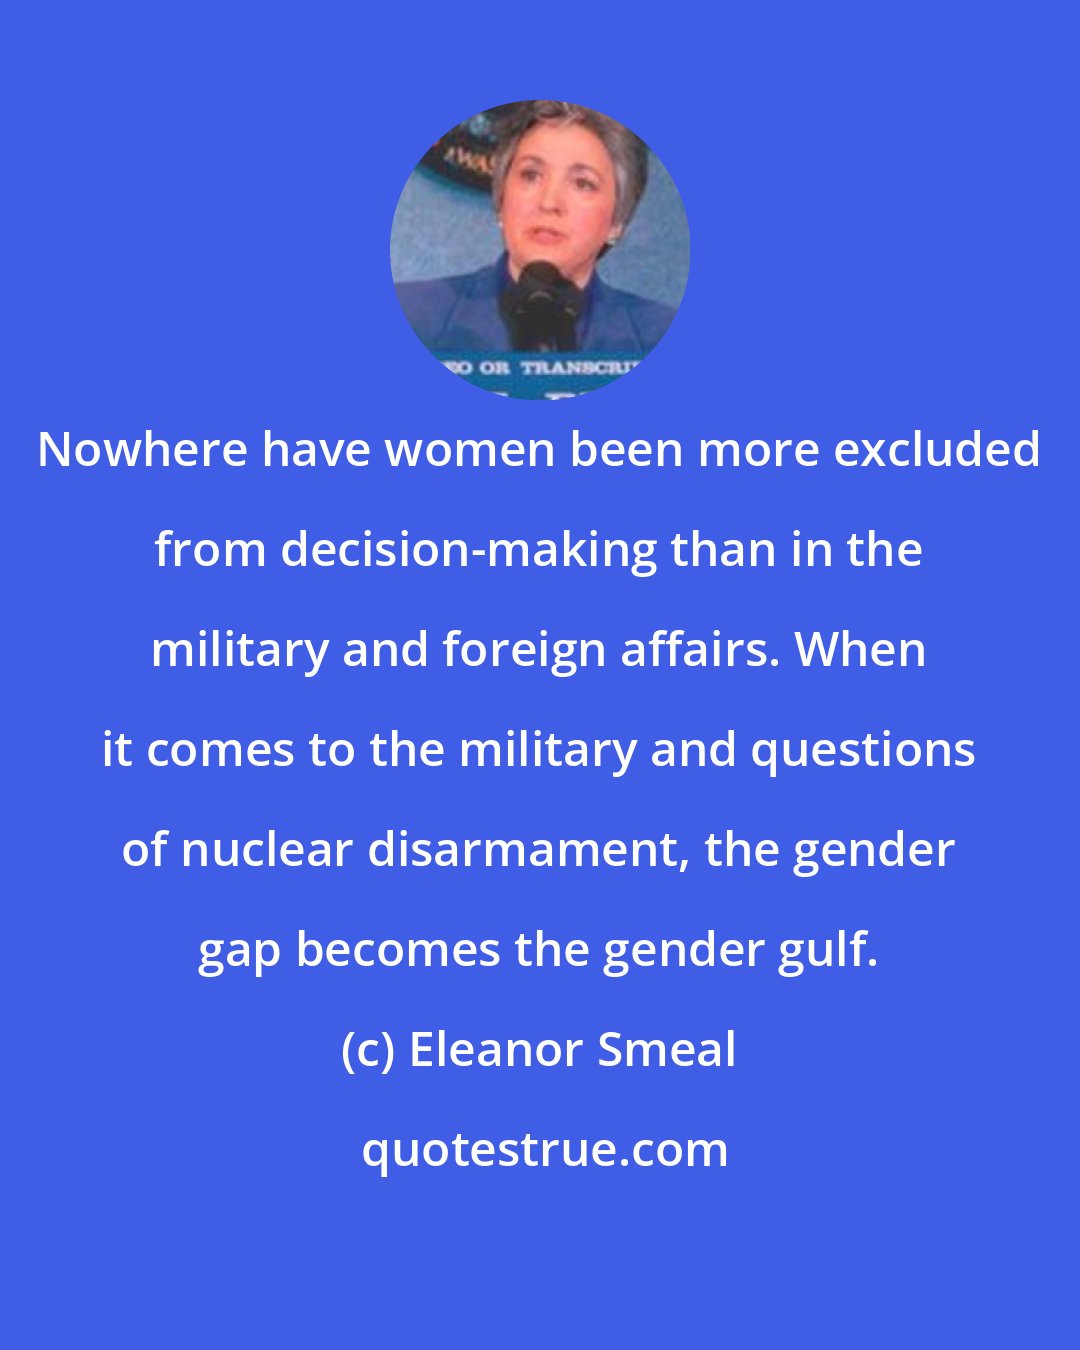 Eleanor Smeal: Nowhere have women been more excluded from decision-making than in the military and foreign affairs. When it comes to the military and questions of nuclear disarmament, the gender gap becomes the gender gulf.